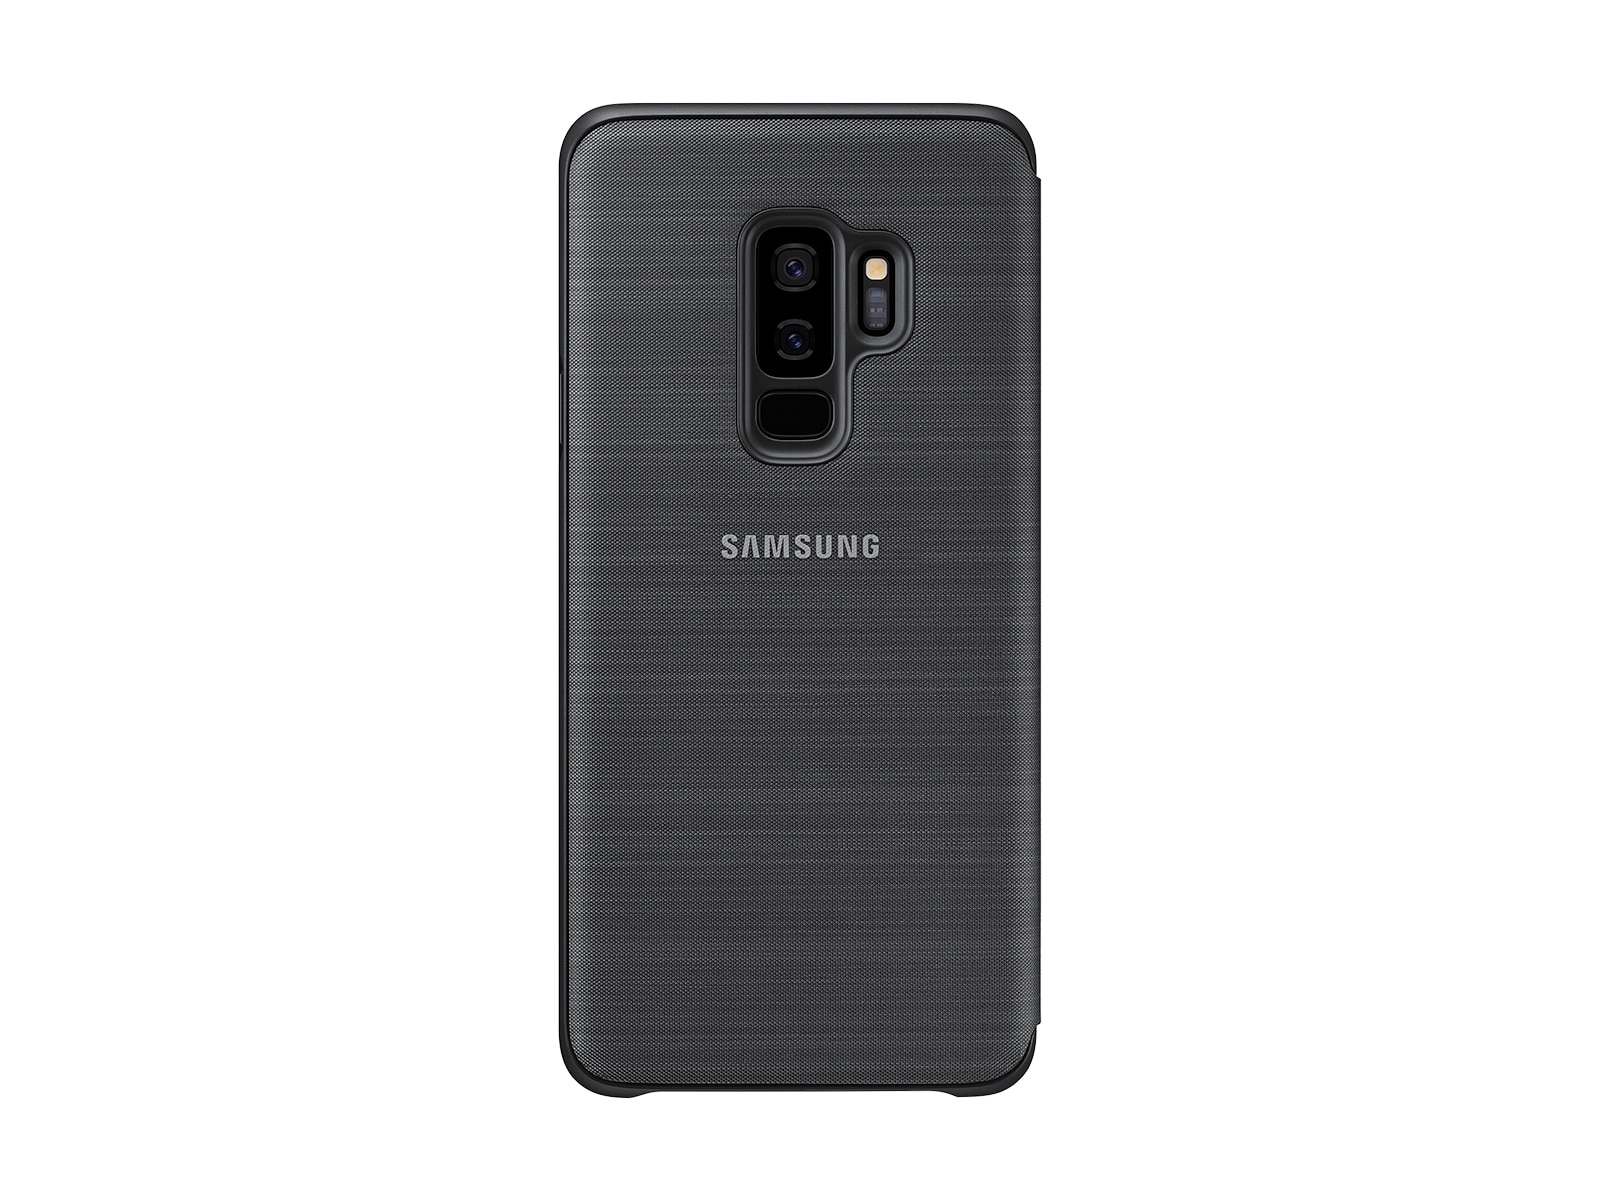 Galaxy S9+ LED Cover, Black Mobile Accessories - EF-NG965PBEGUS | Samsung US